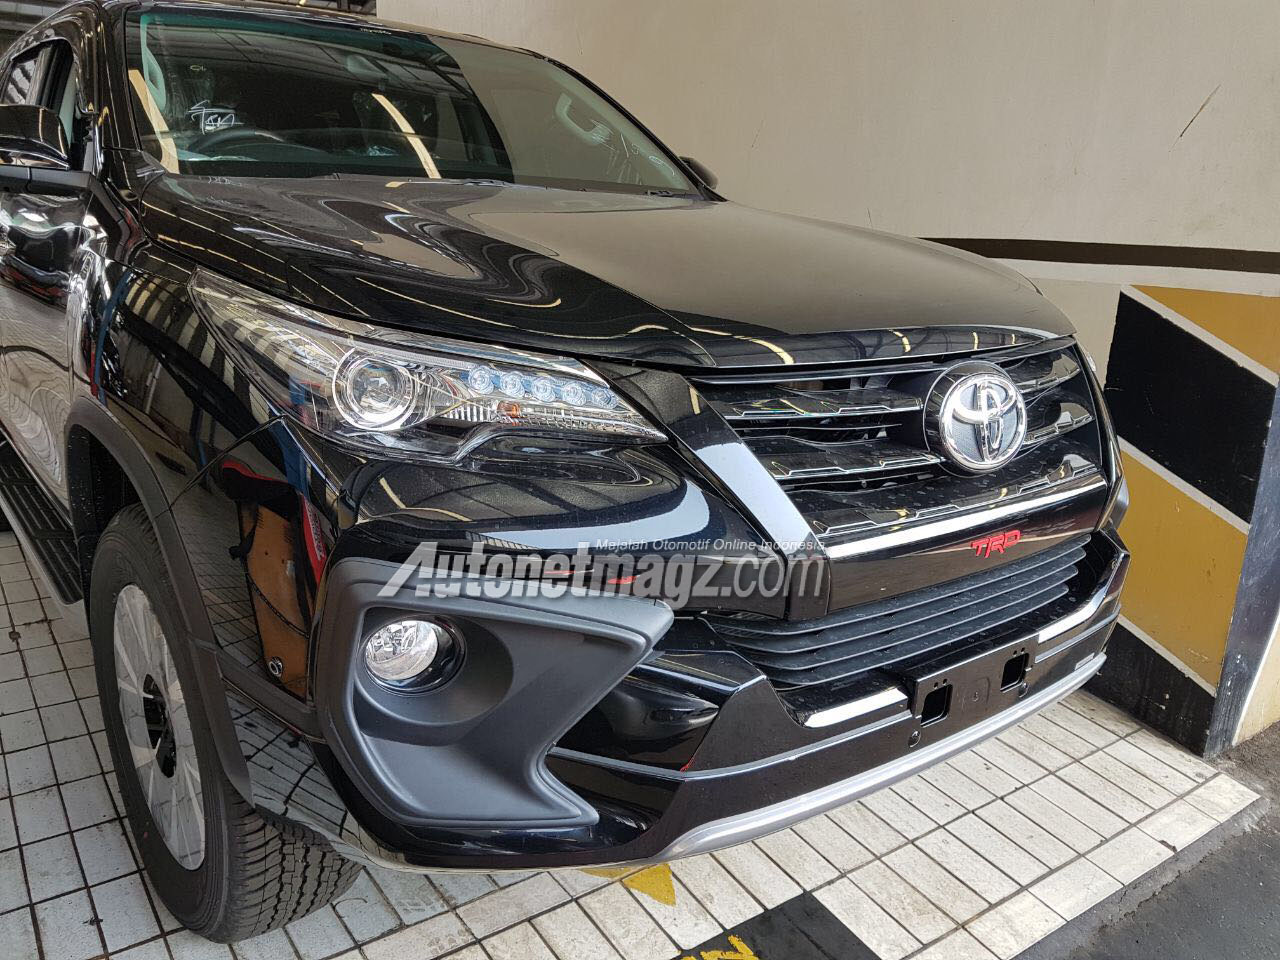 GIIAS 2017, toyota fortuner trd sportivo indonesia front spyshot: GIIAS 2017 : Toyota Fortuner TRD Sportivo, Calon Fortuner Termahal?